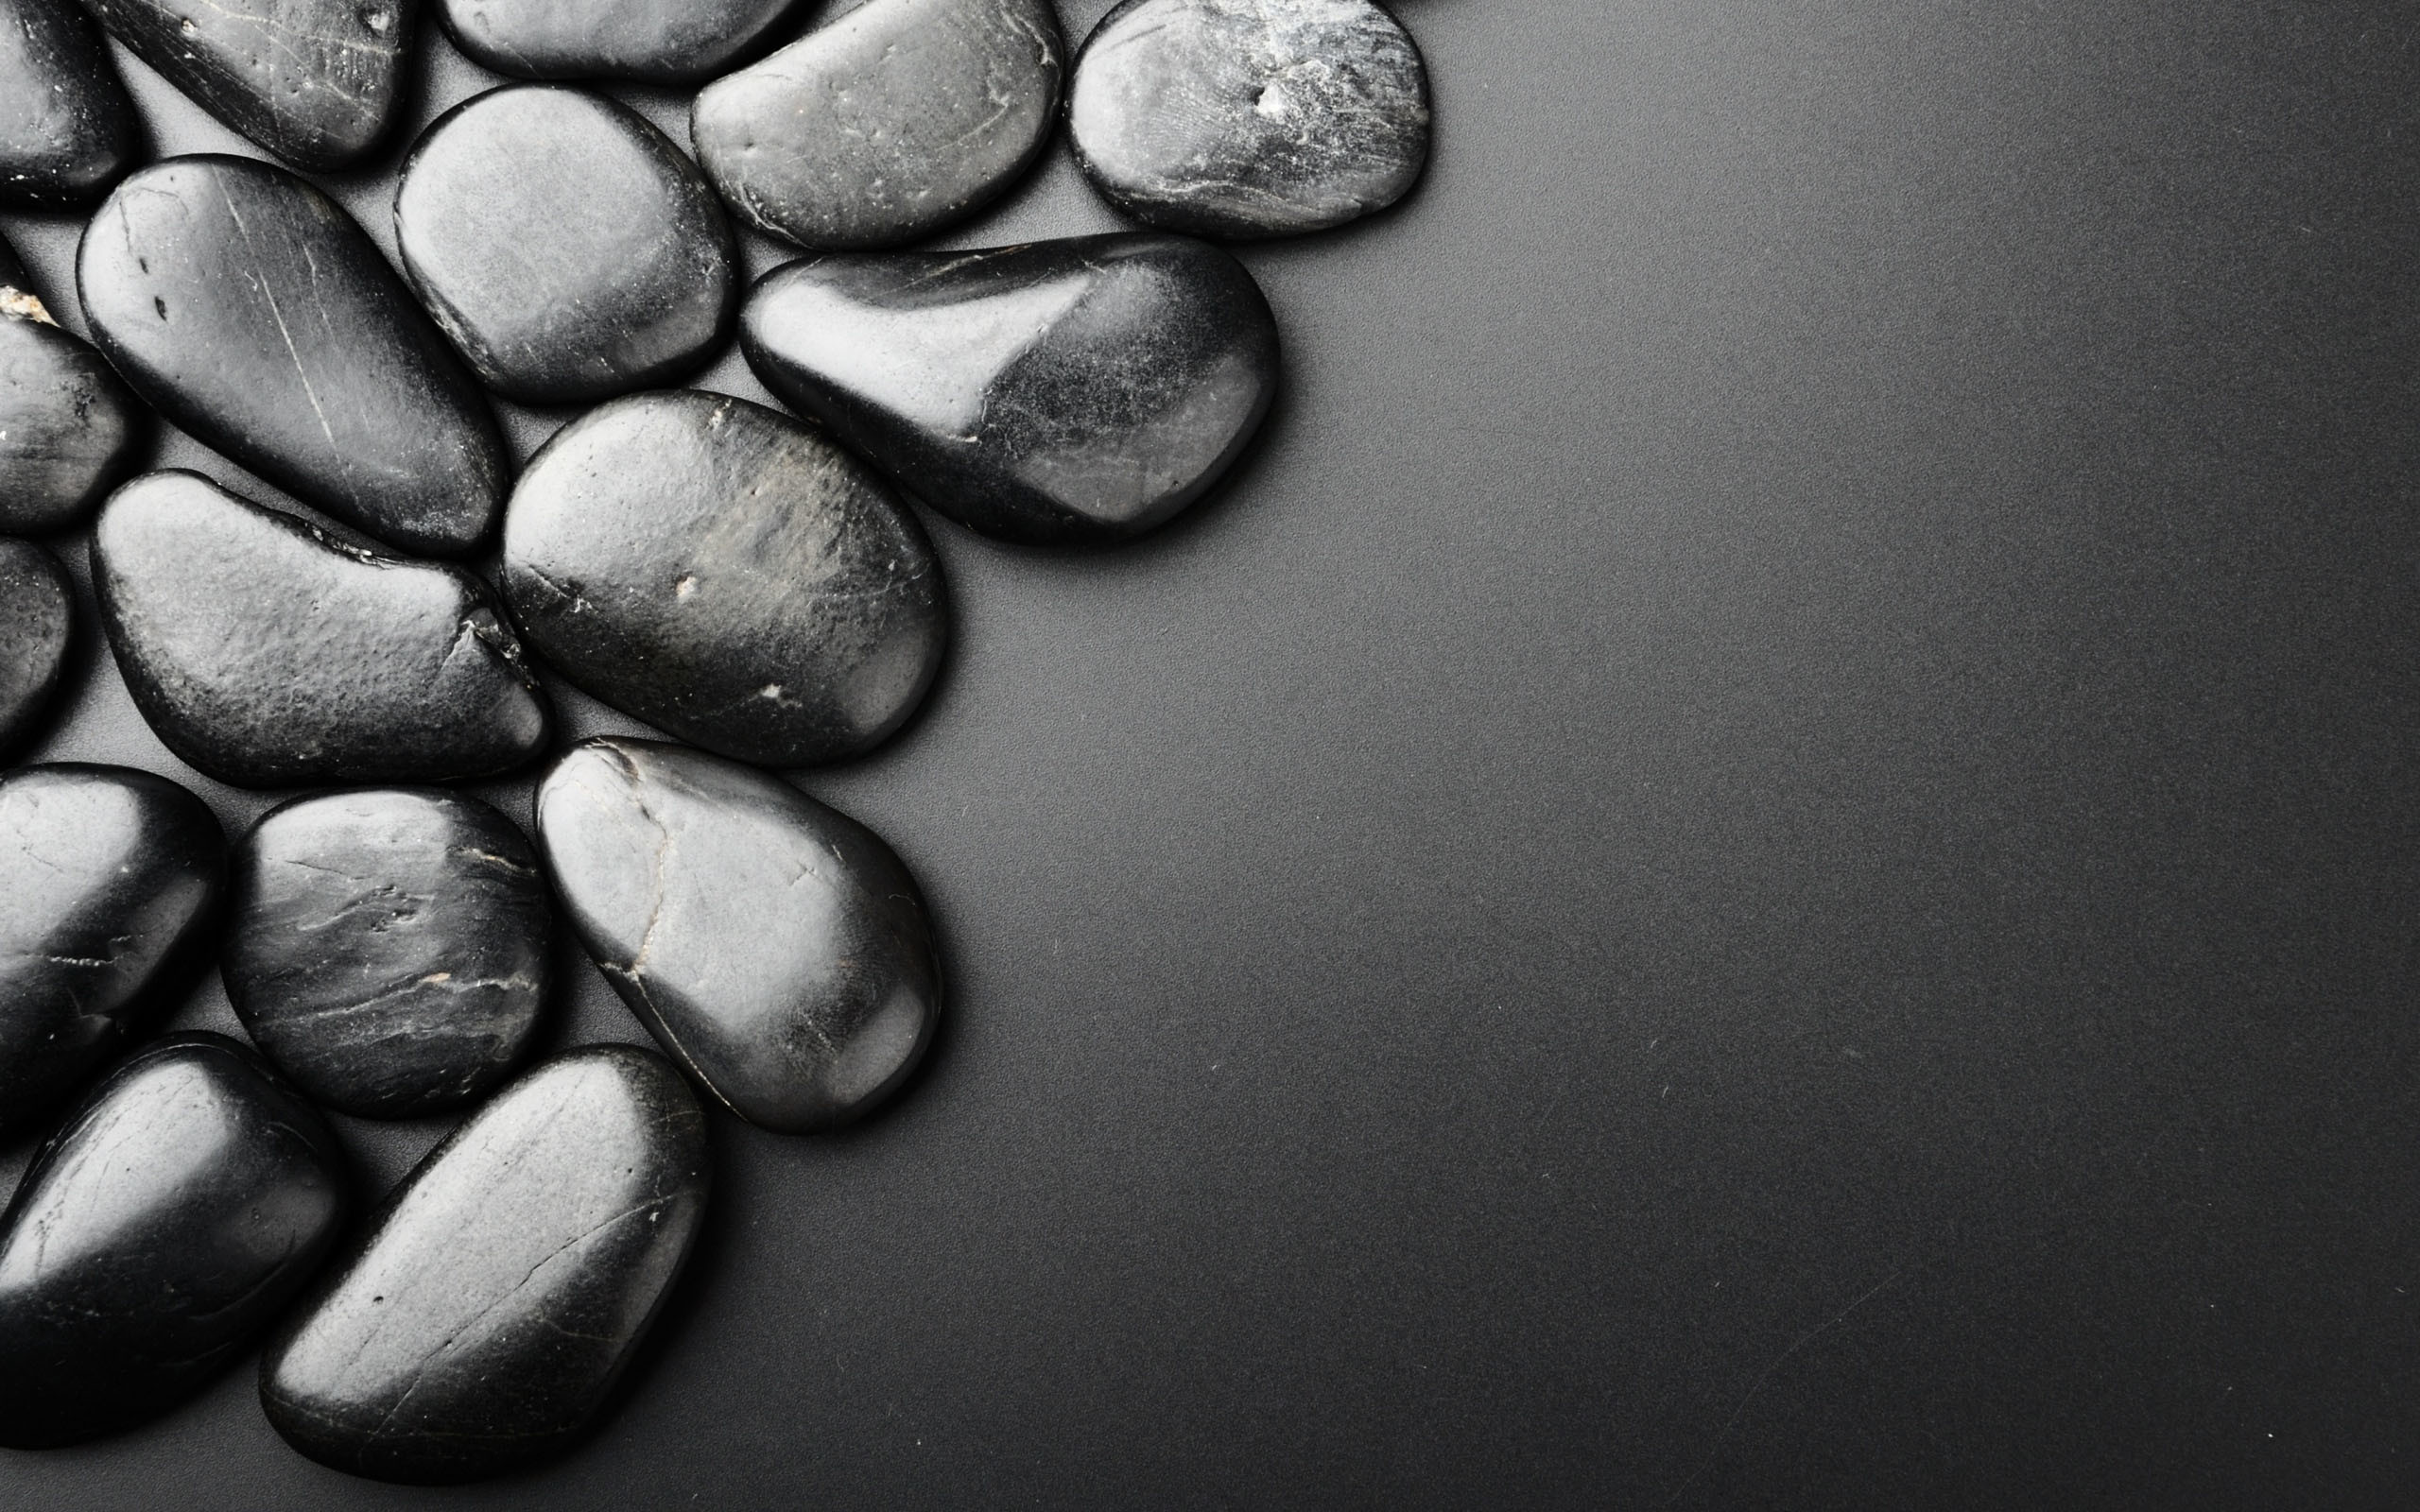 2560x1600 HD Free 3D Stone Backgrounds.